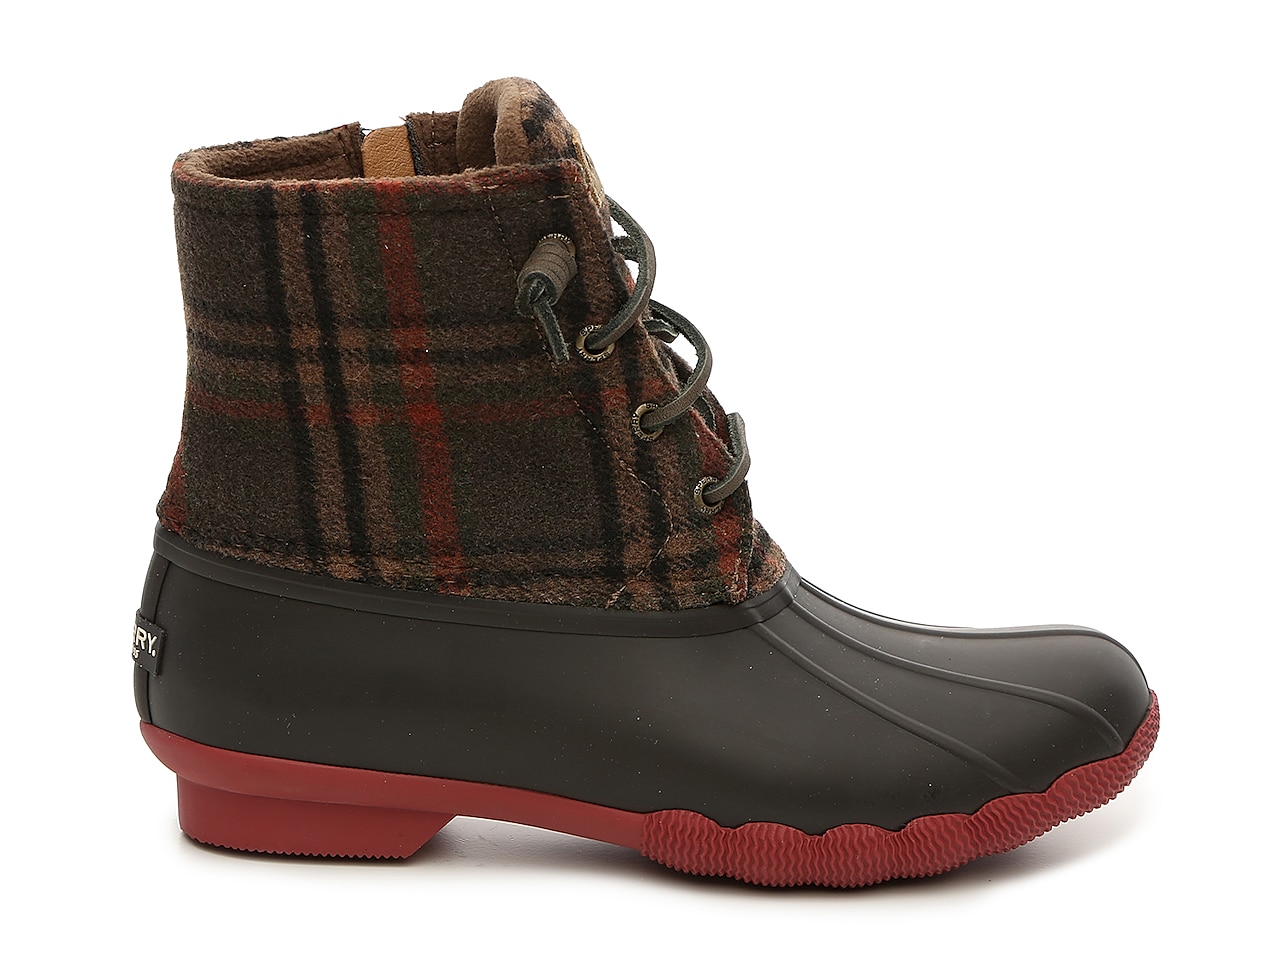 Sperry Saltwater Plaid Duck Boot | DSW